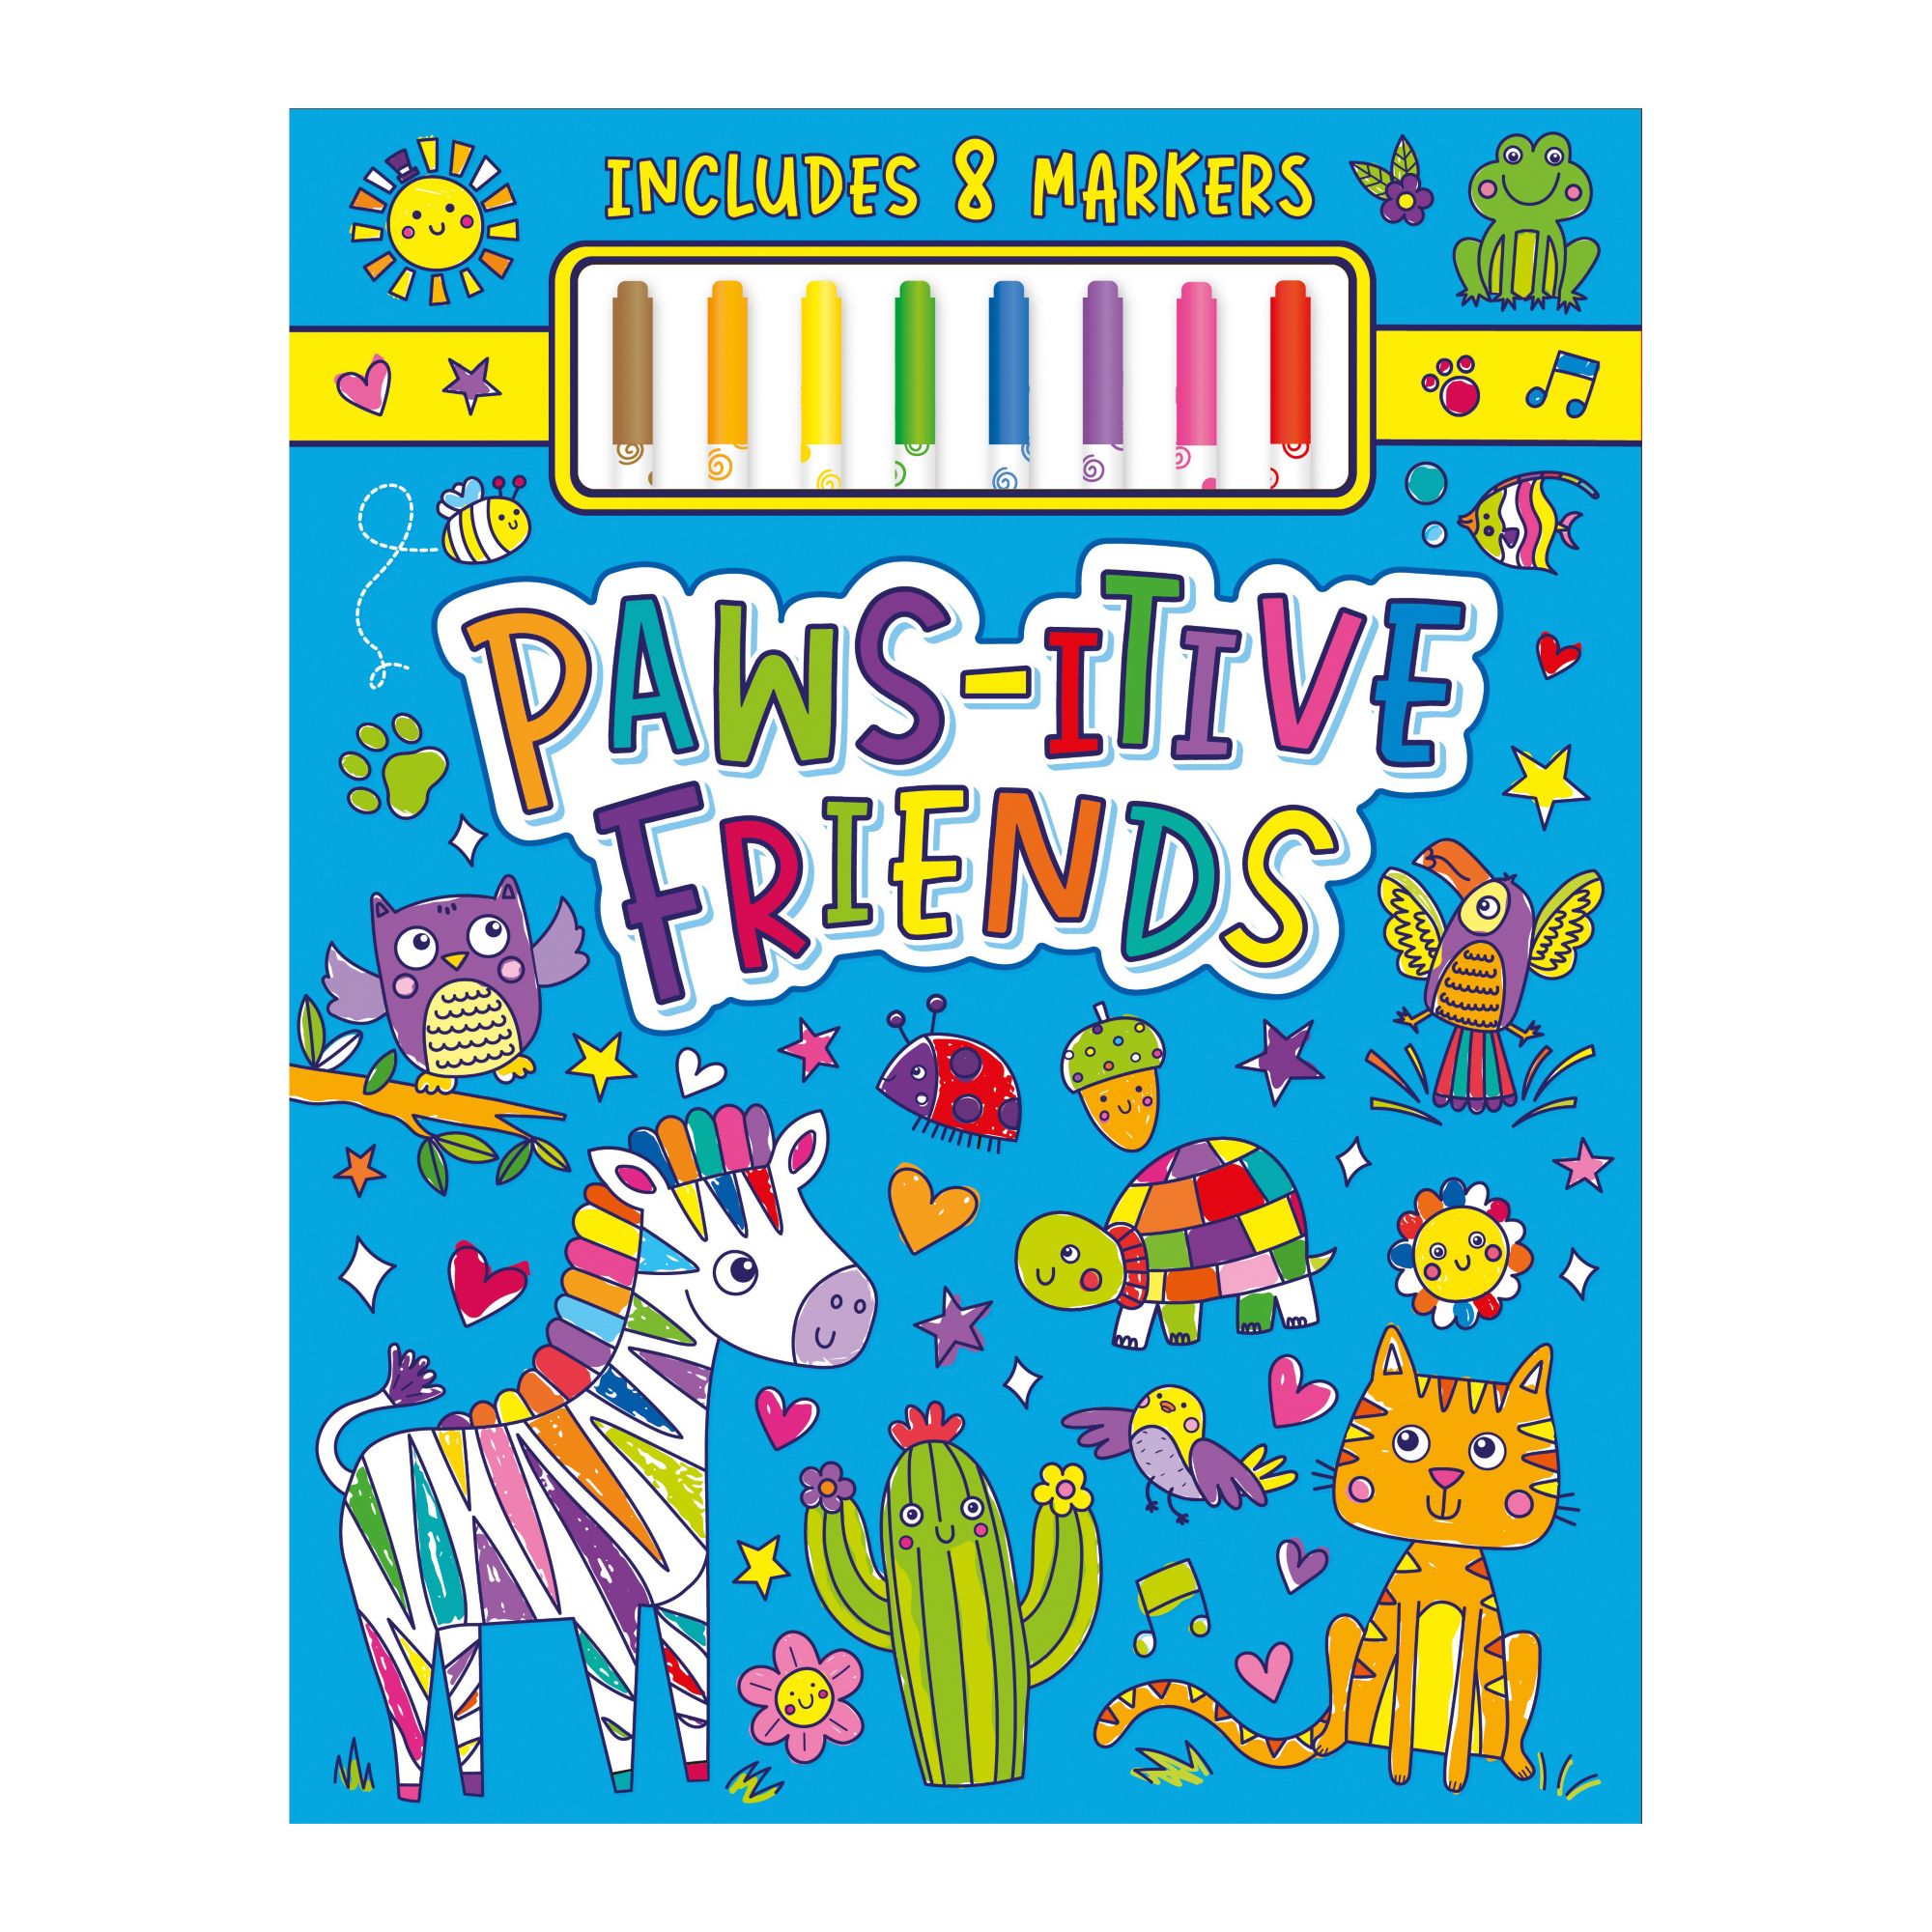 Paws-itive Friends Coloring Kit  